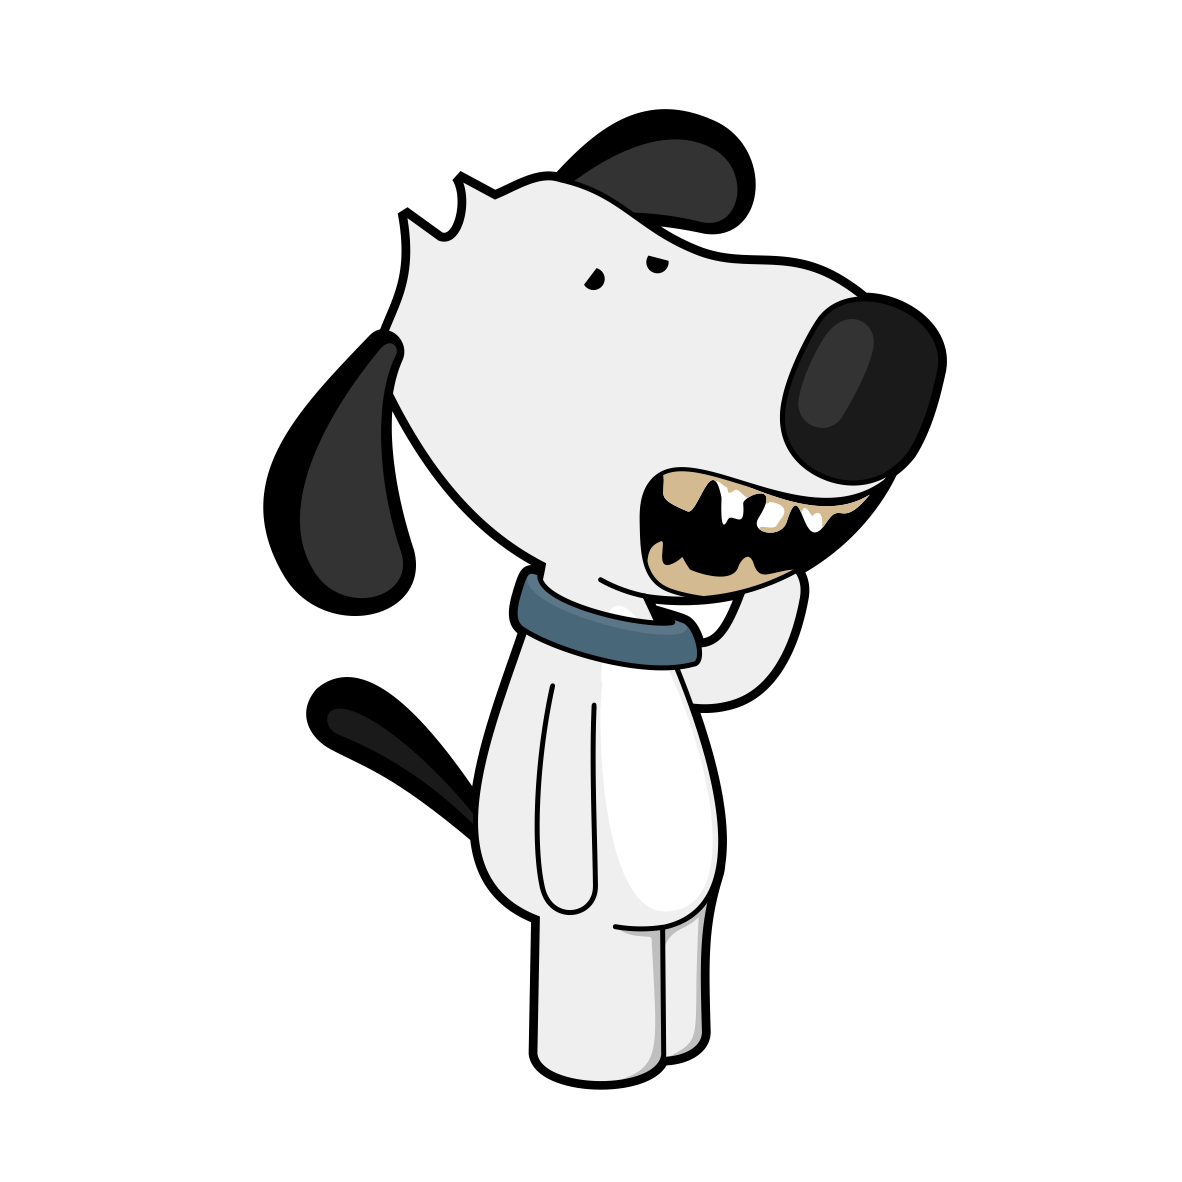 Gum in dogs the. Disease clipart black and white